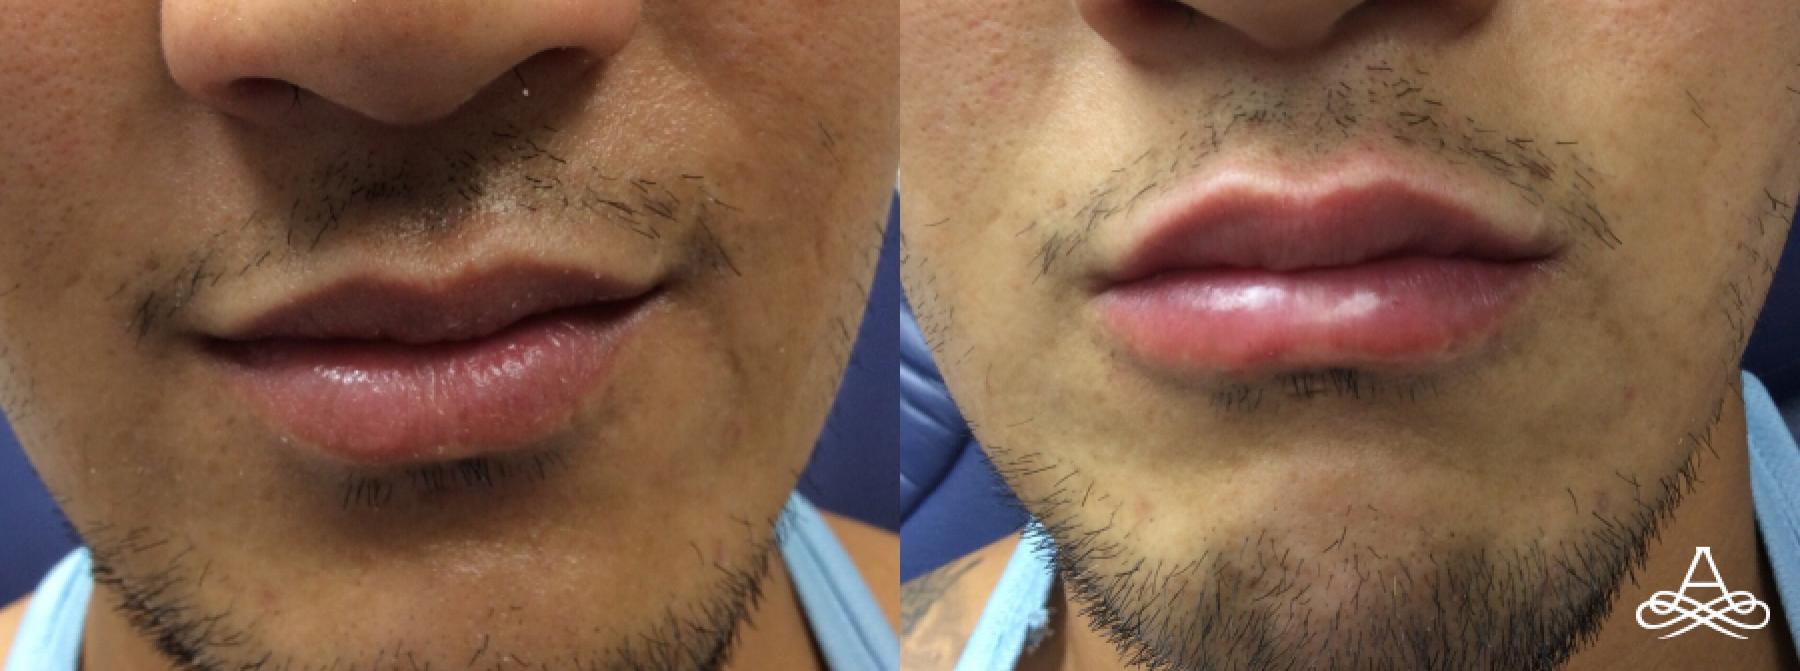 Lip Filler: Patient 4 - Before and After 1